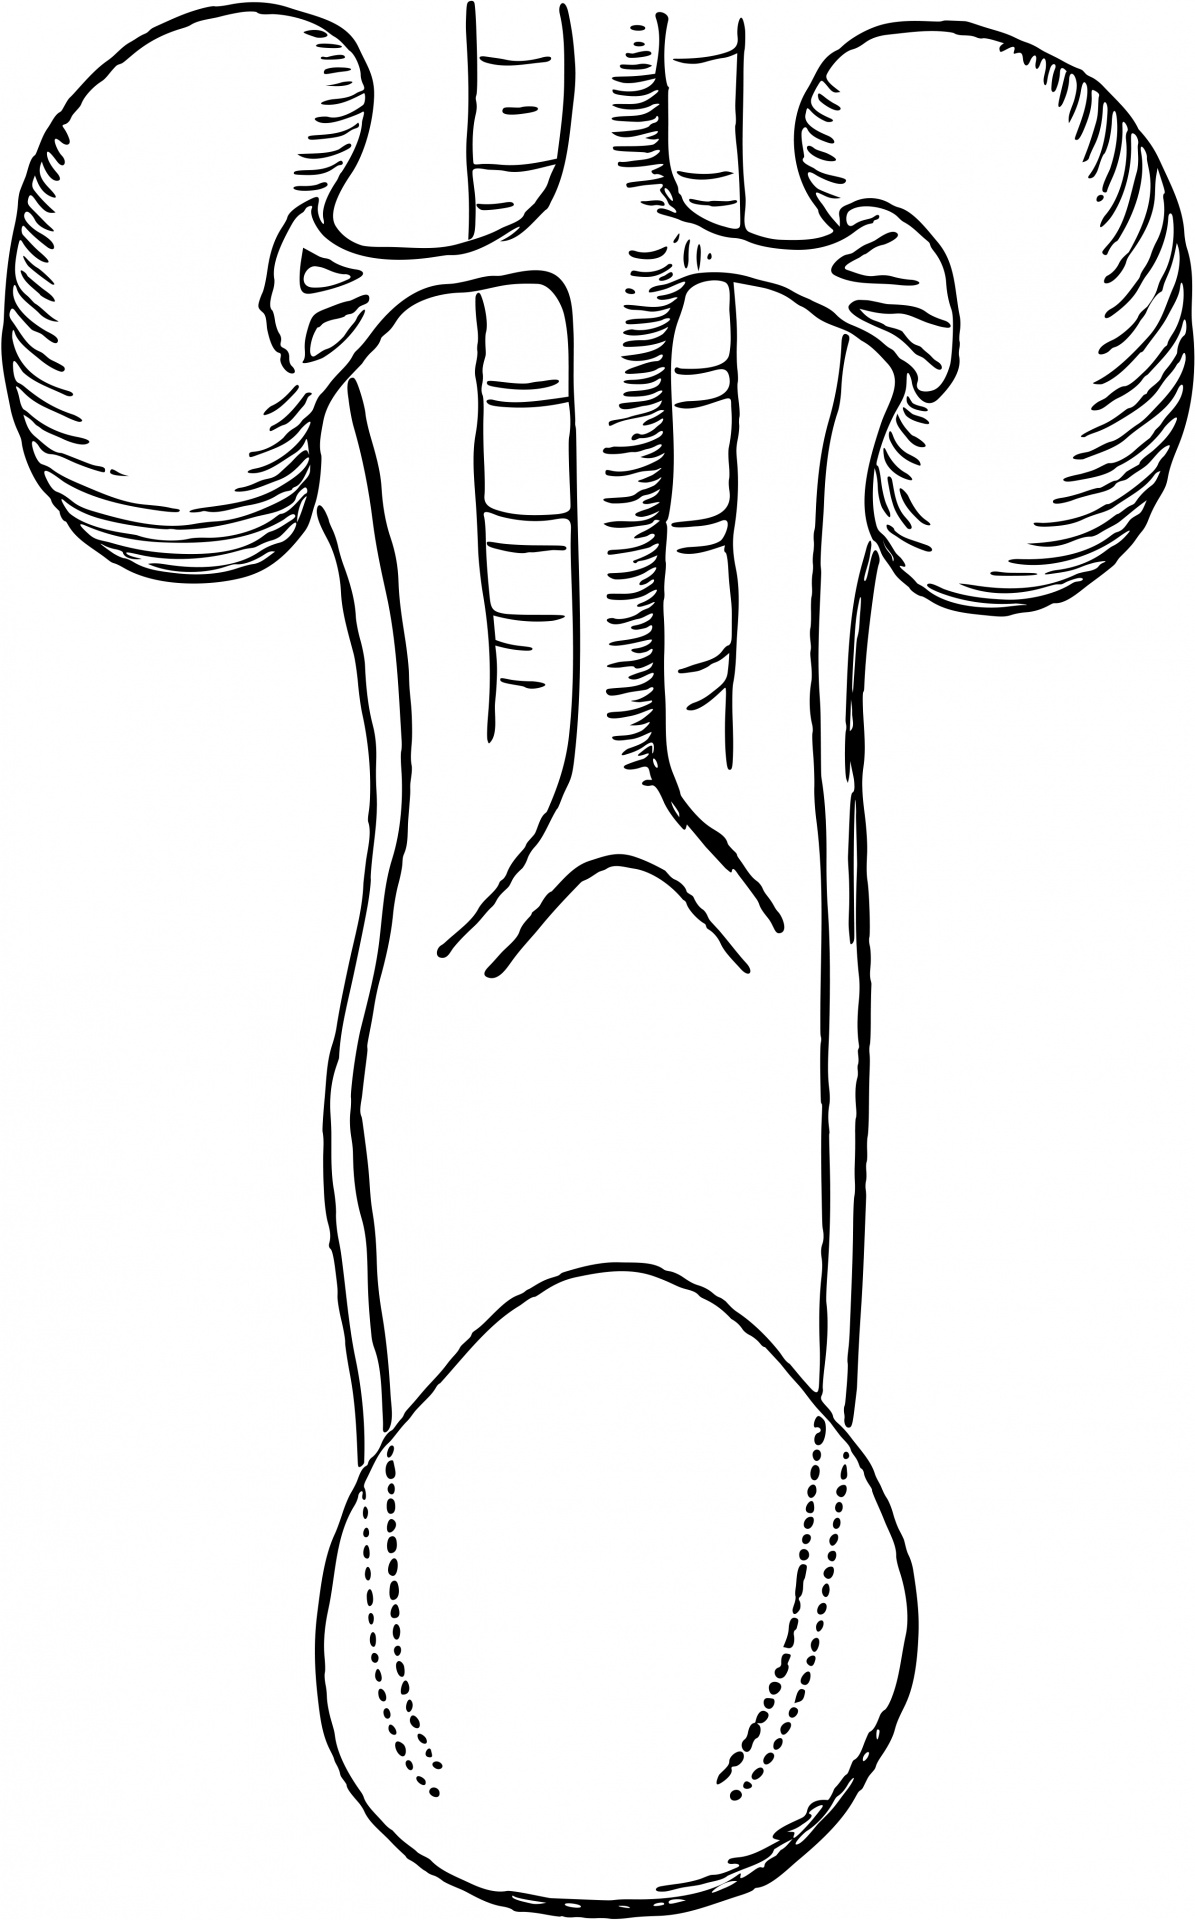 Kidney Urinary System Coloring Page Sketch Coloring Page